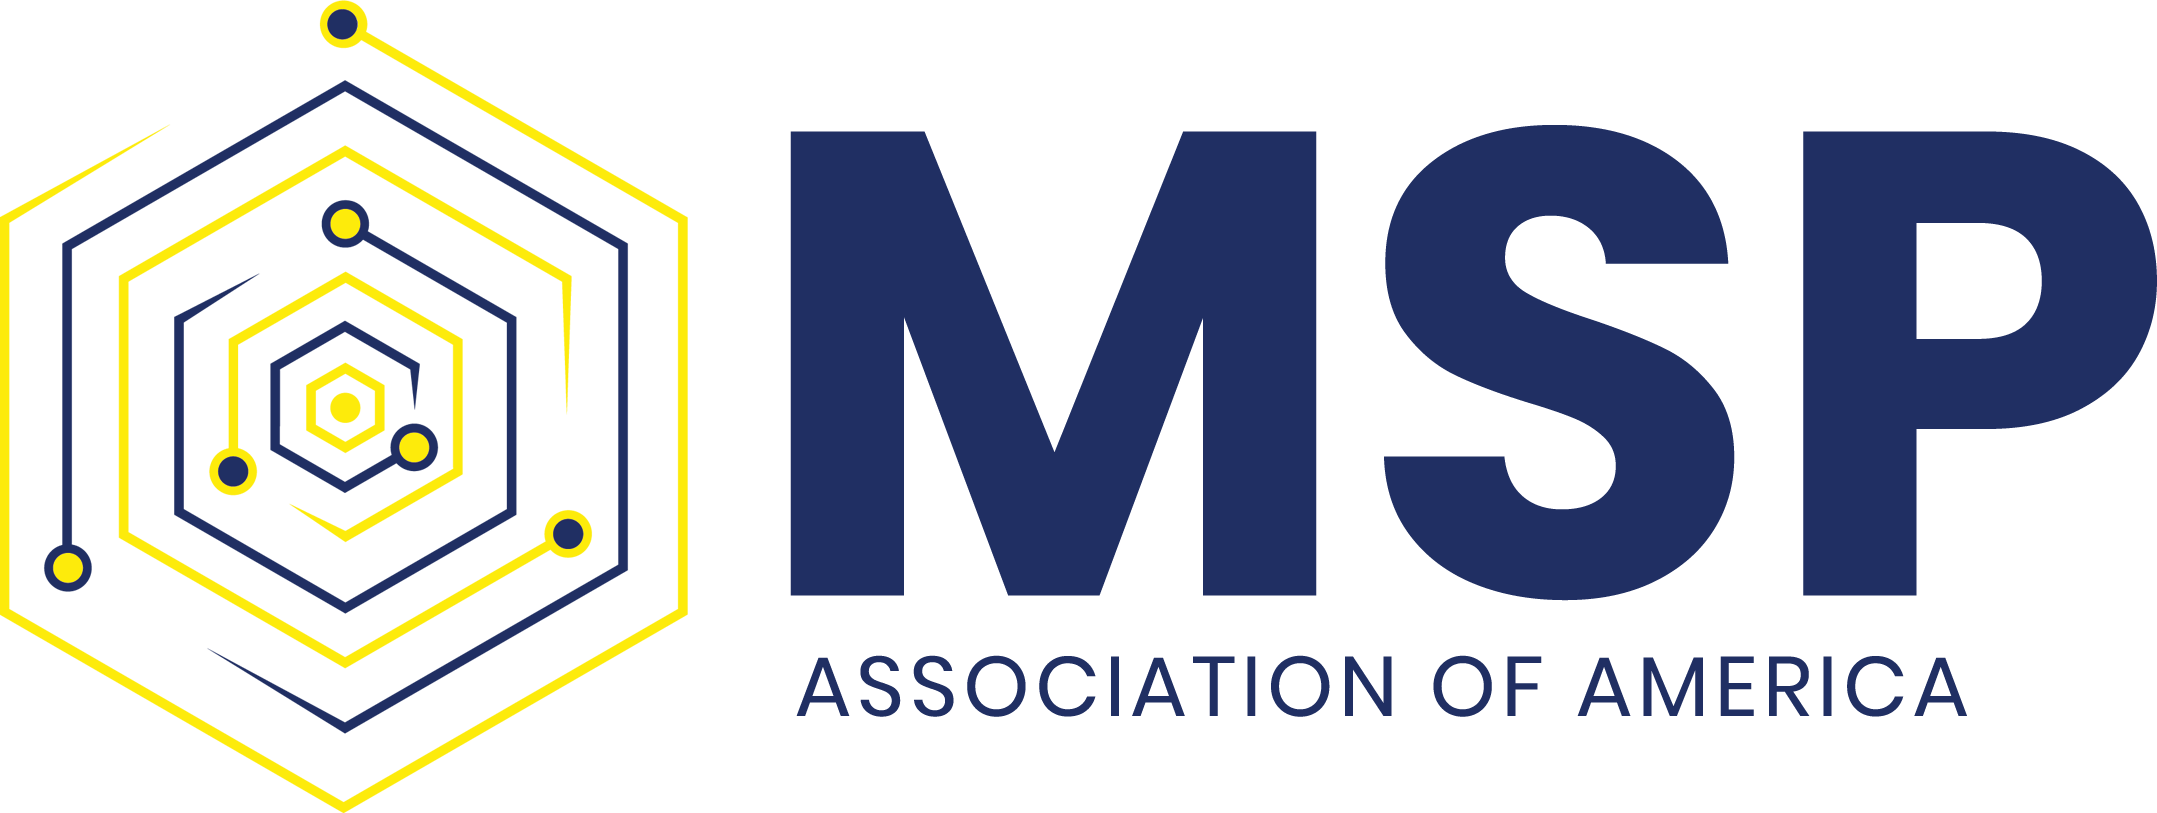 Our Team Your Team | MSP Association of America